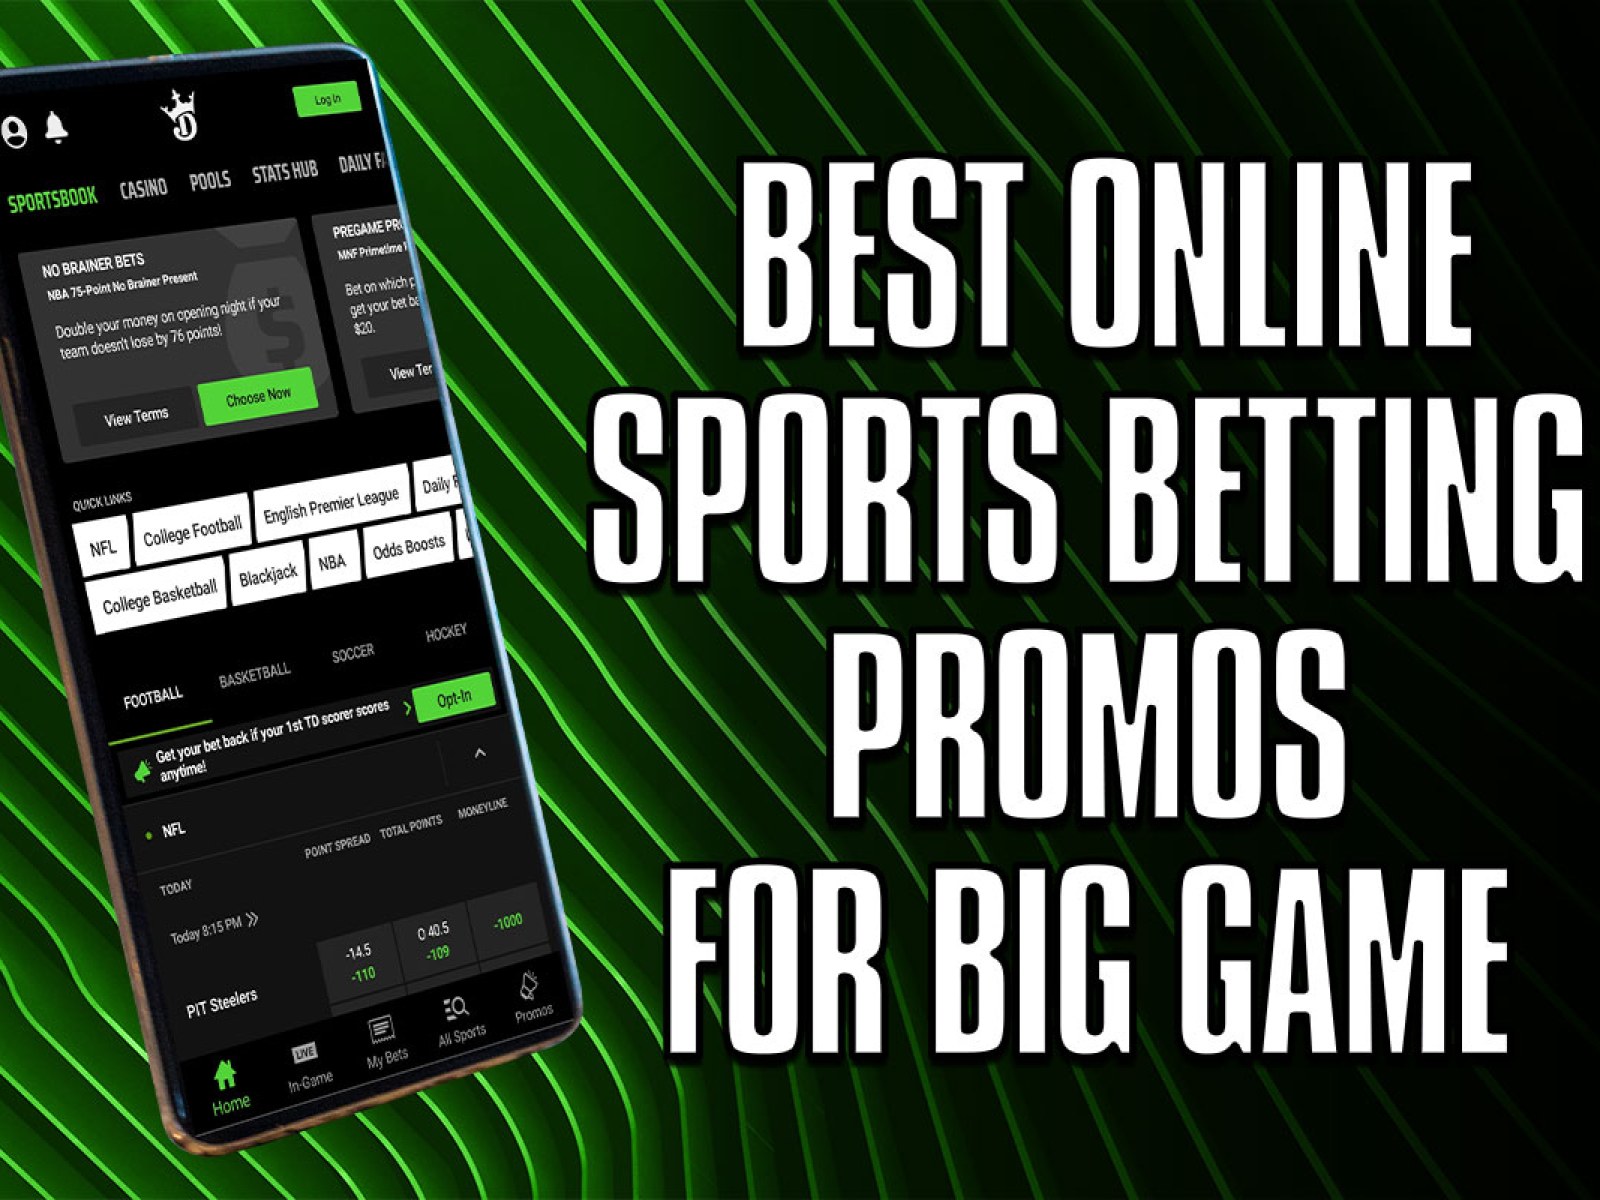 Best Live Betting Sites: 2023 Picks For In-Play Bets 